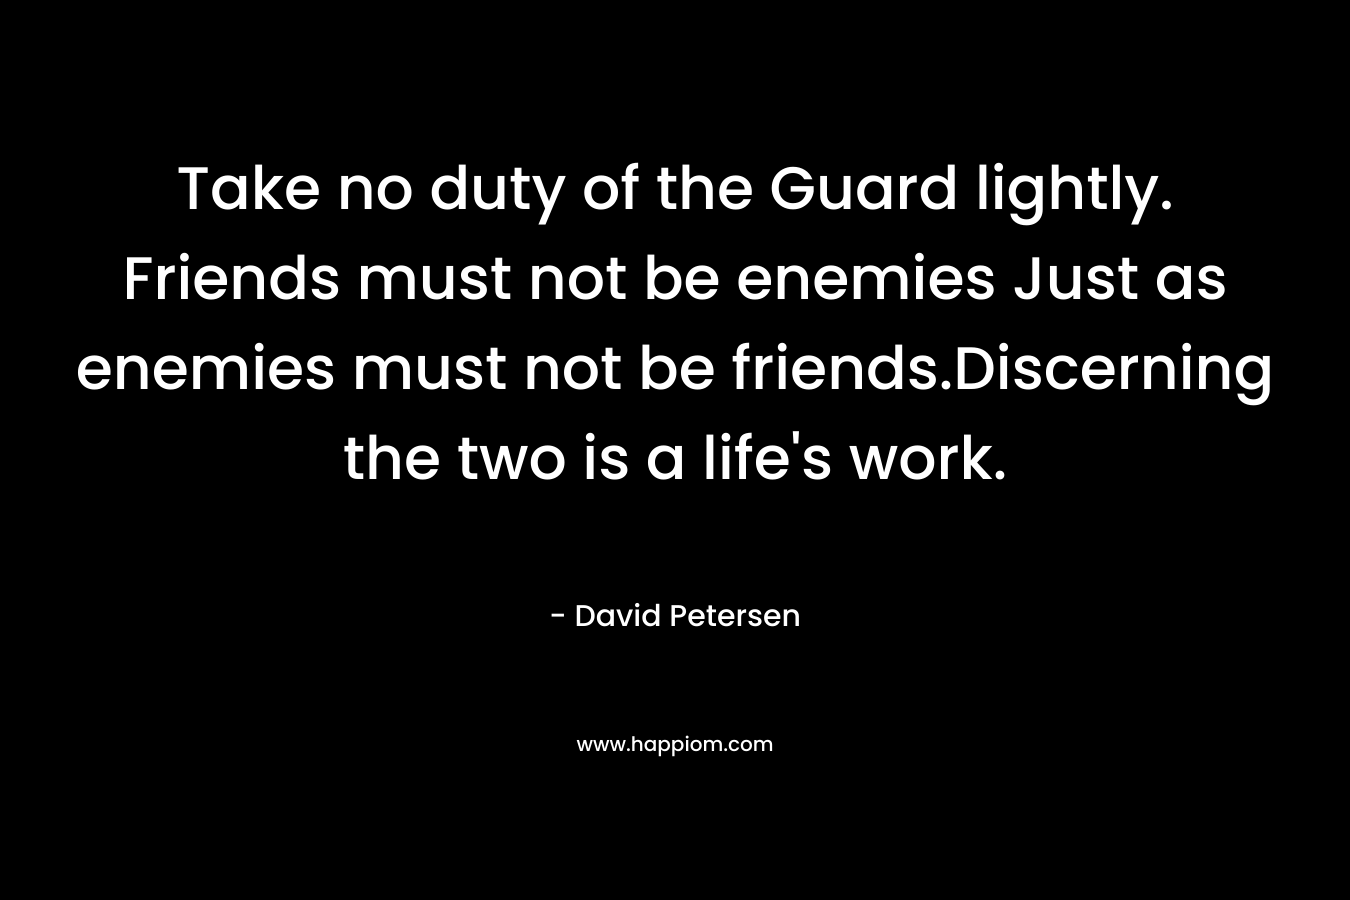 Take no duty of the Guard lightly. Friends must not be enemies Just as enemies must not be friends.Discerning the two is a life's work.